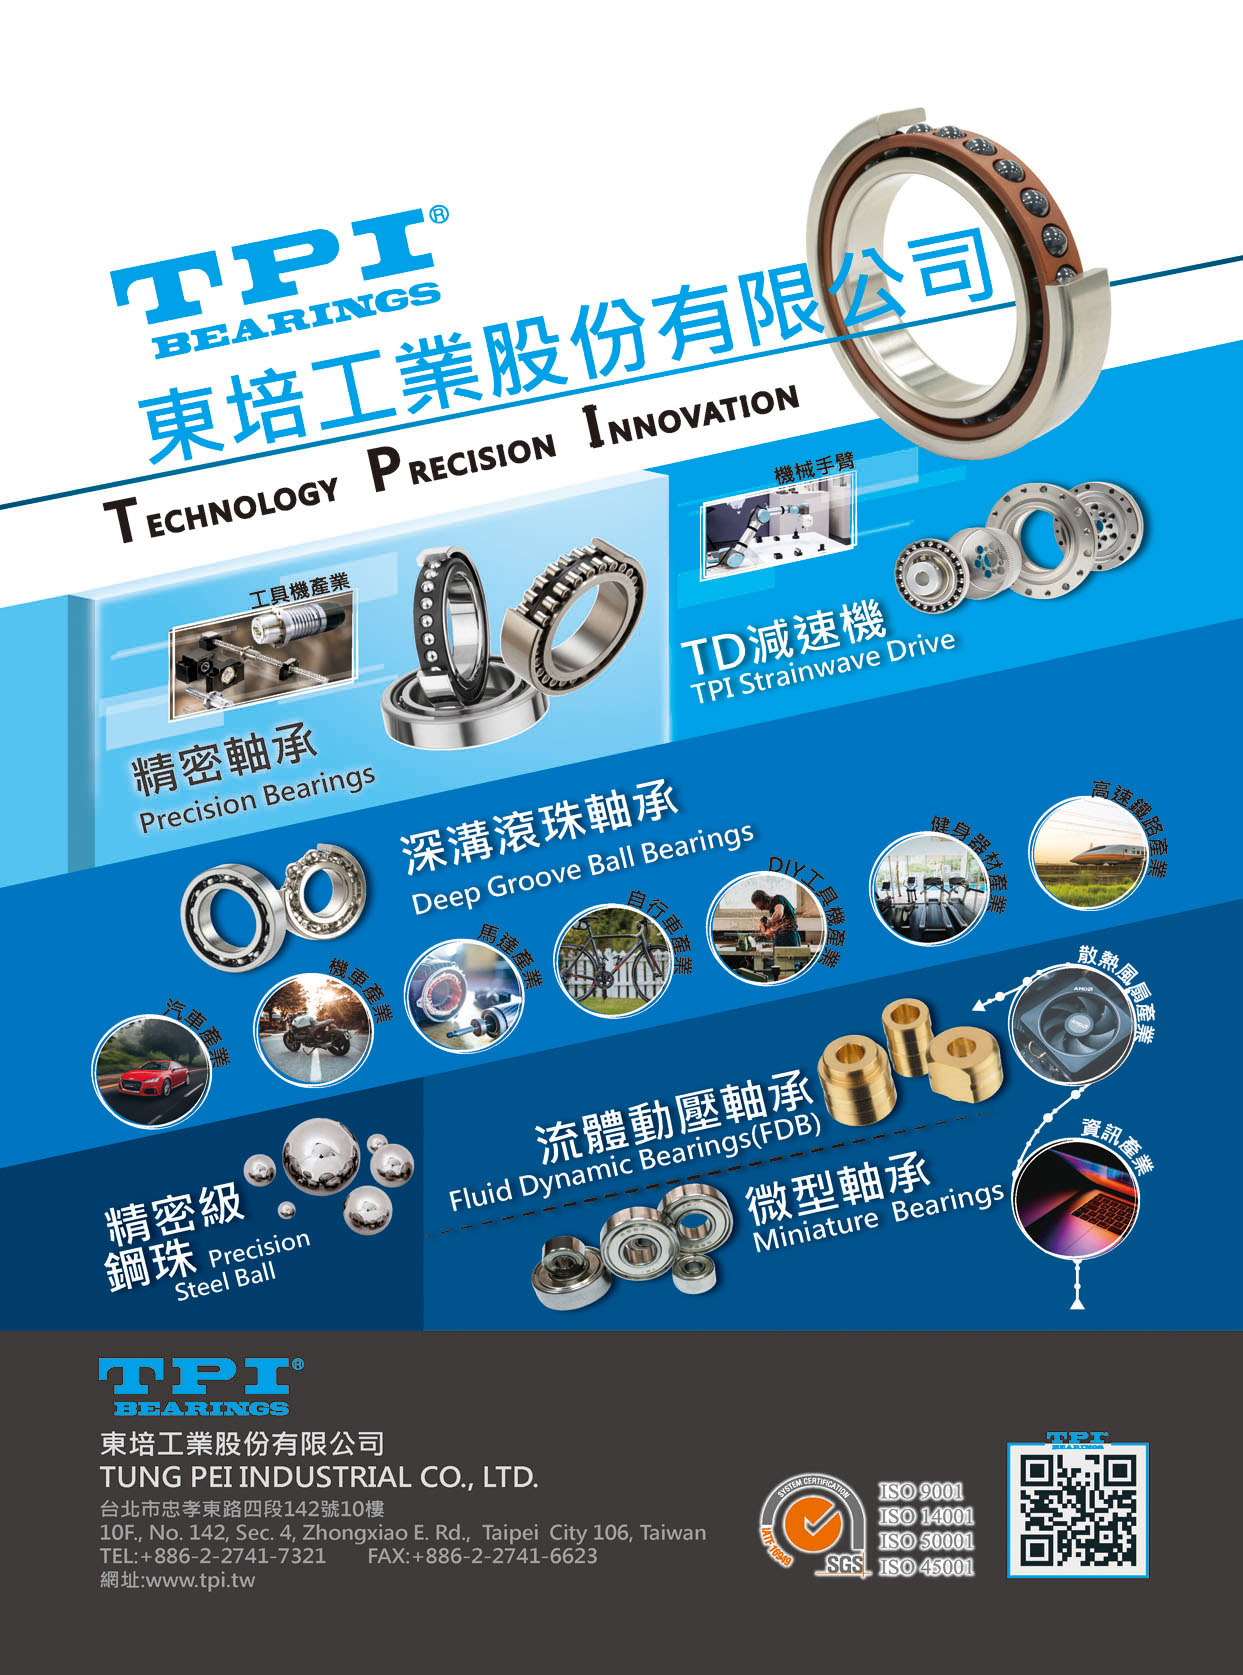 Who Makes Machinery in Taiwan (Chinese) TUNG PEI INDUSTRIAL CO., LTD.